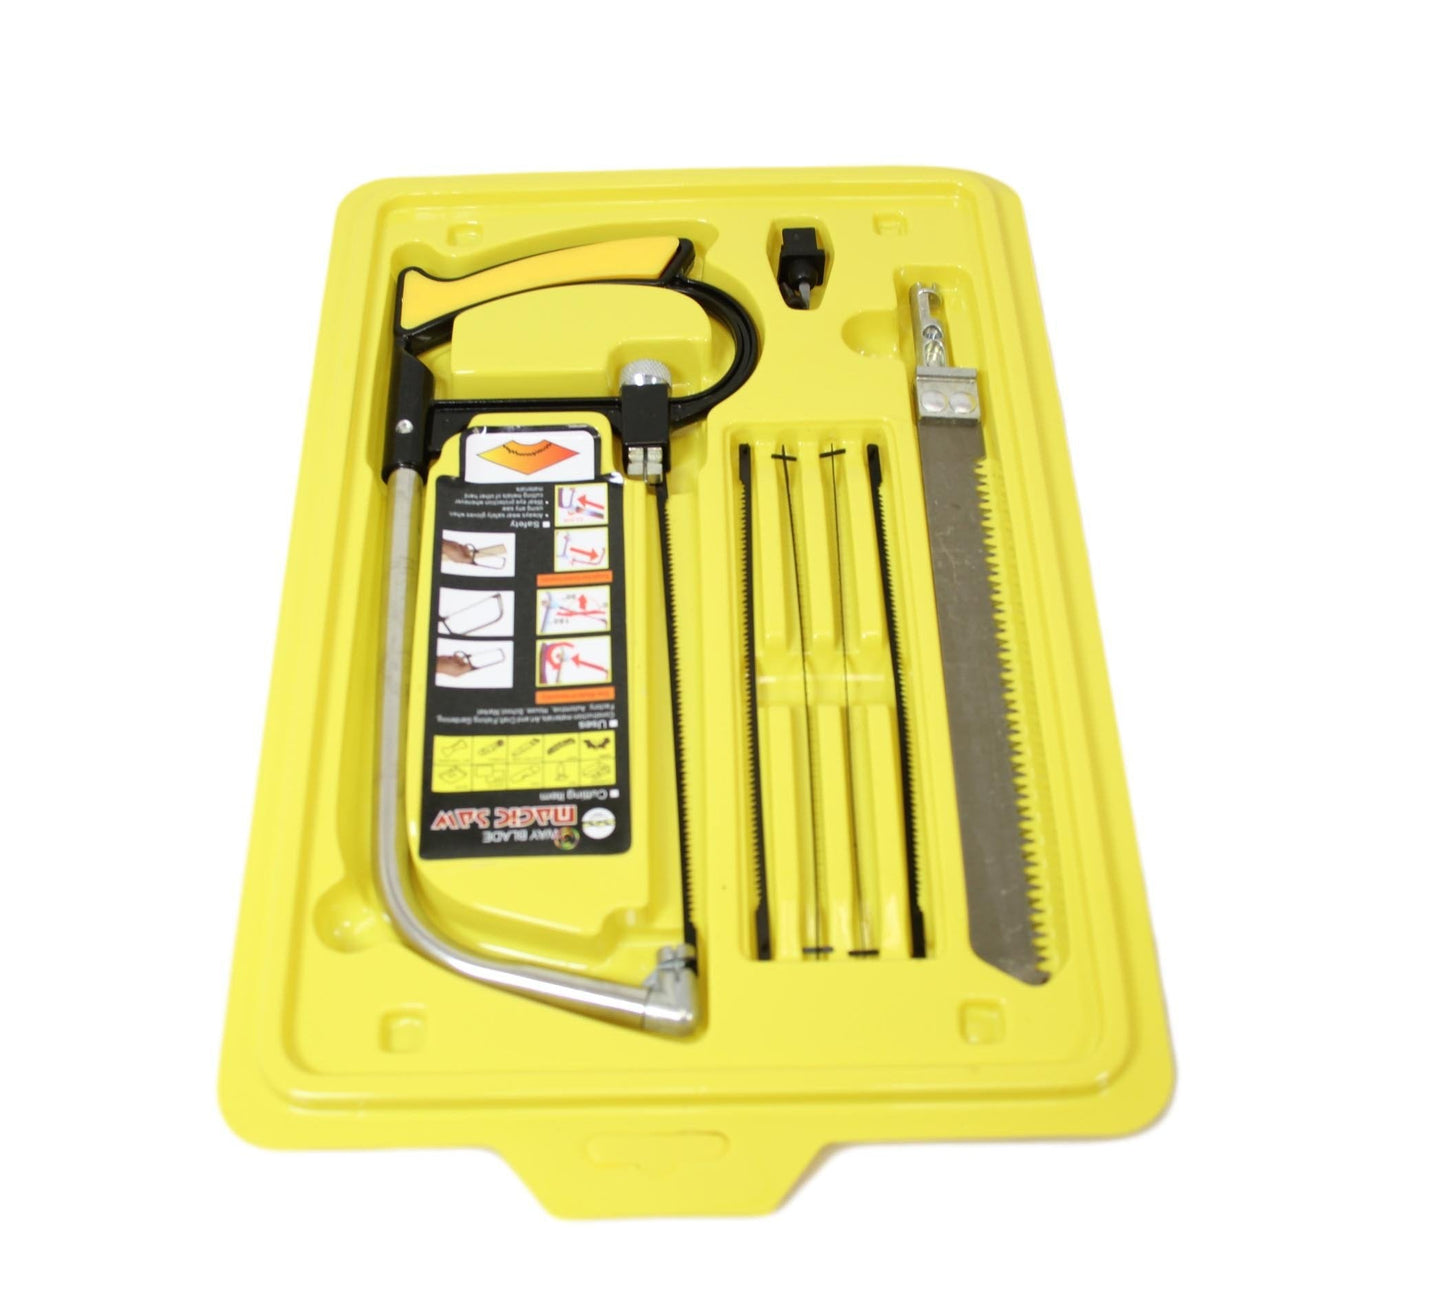 3 Way Blade Magic Saw Set Kit Assorted Blades 18 - 24 cm 5873 (Large Letter Rate)